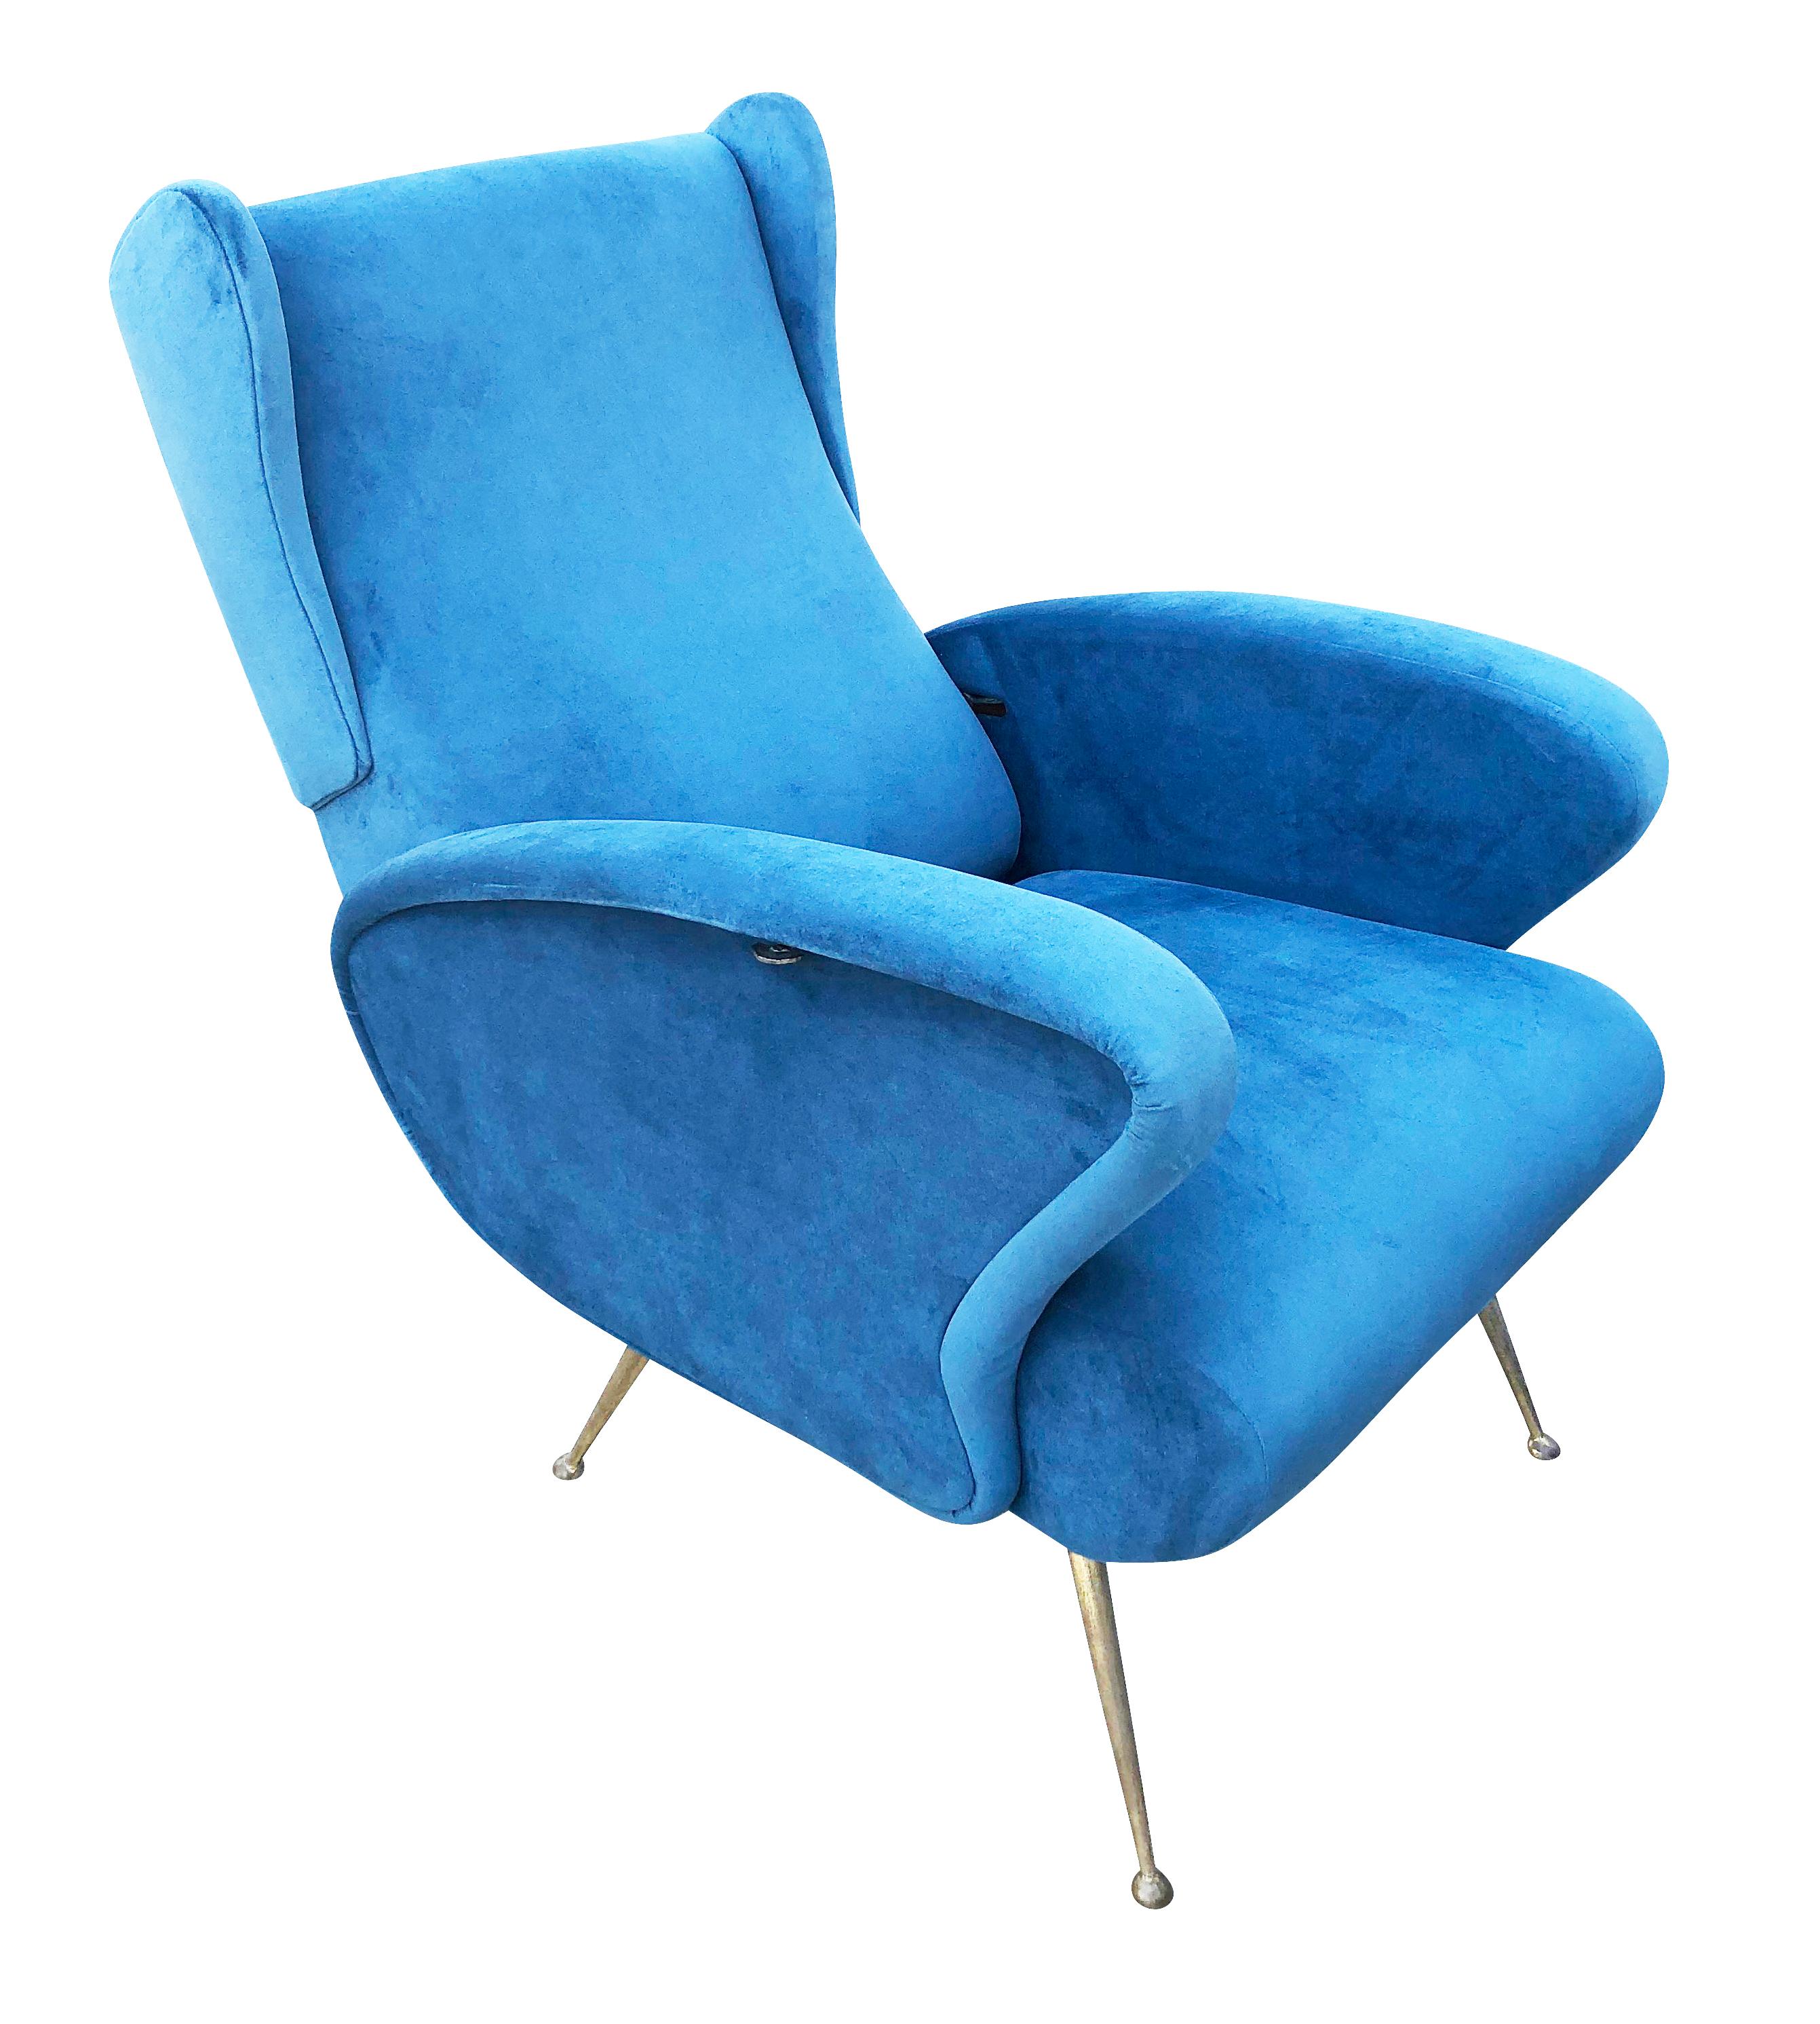 Reclining midcentury wing chair reminiscent of the works of Marco Zanuso. Brass legs and recovered in a blue velvet.

Condition: Minor wear consistent with age and use. Recently recovered.

Measures: Width 25.75”

Depth 28”

Height